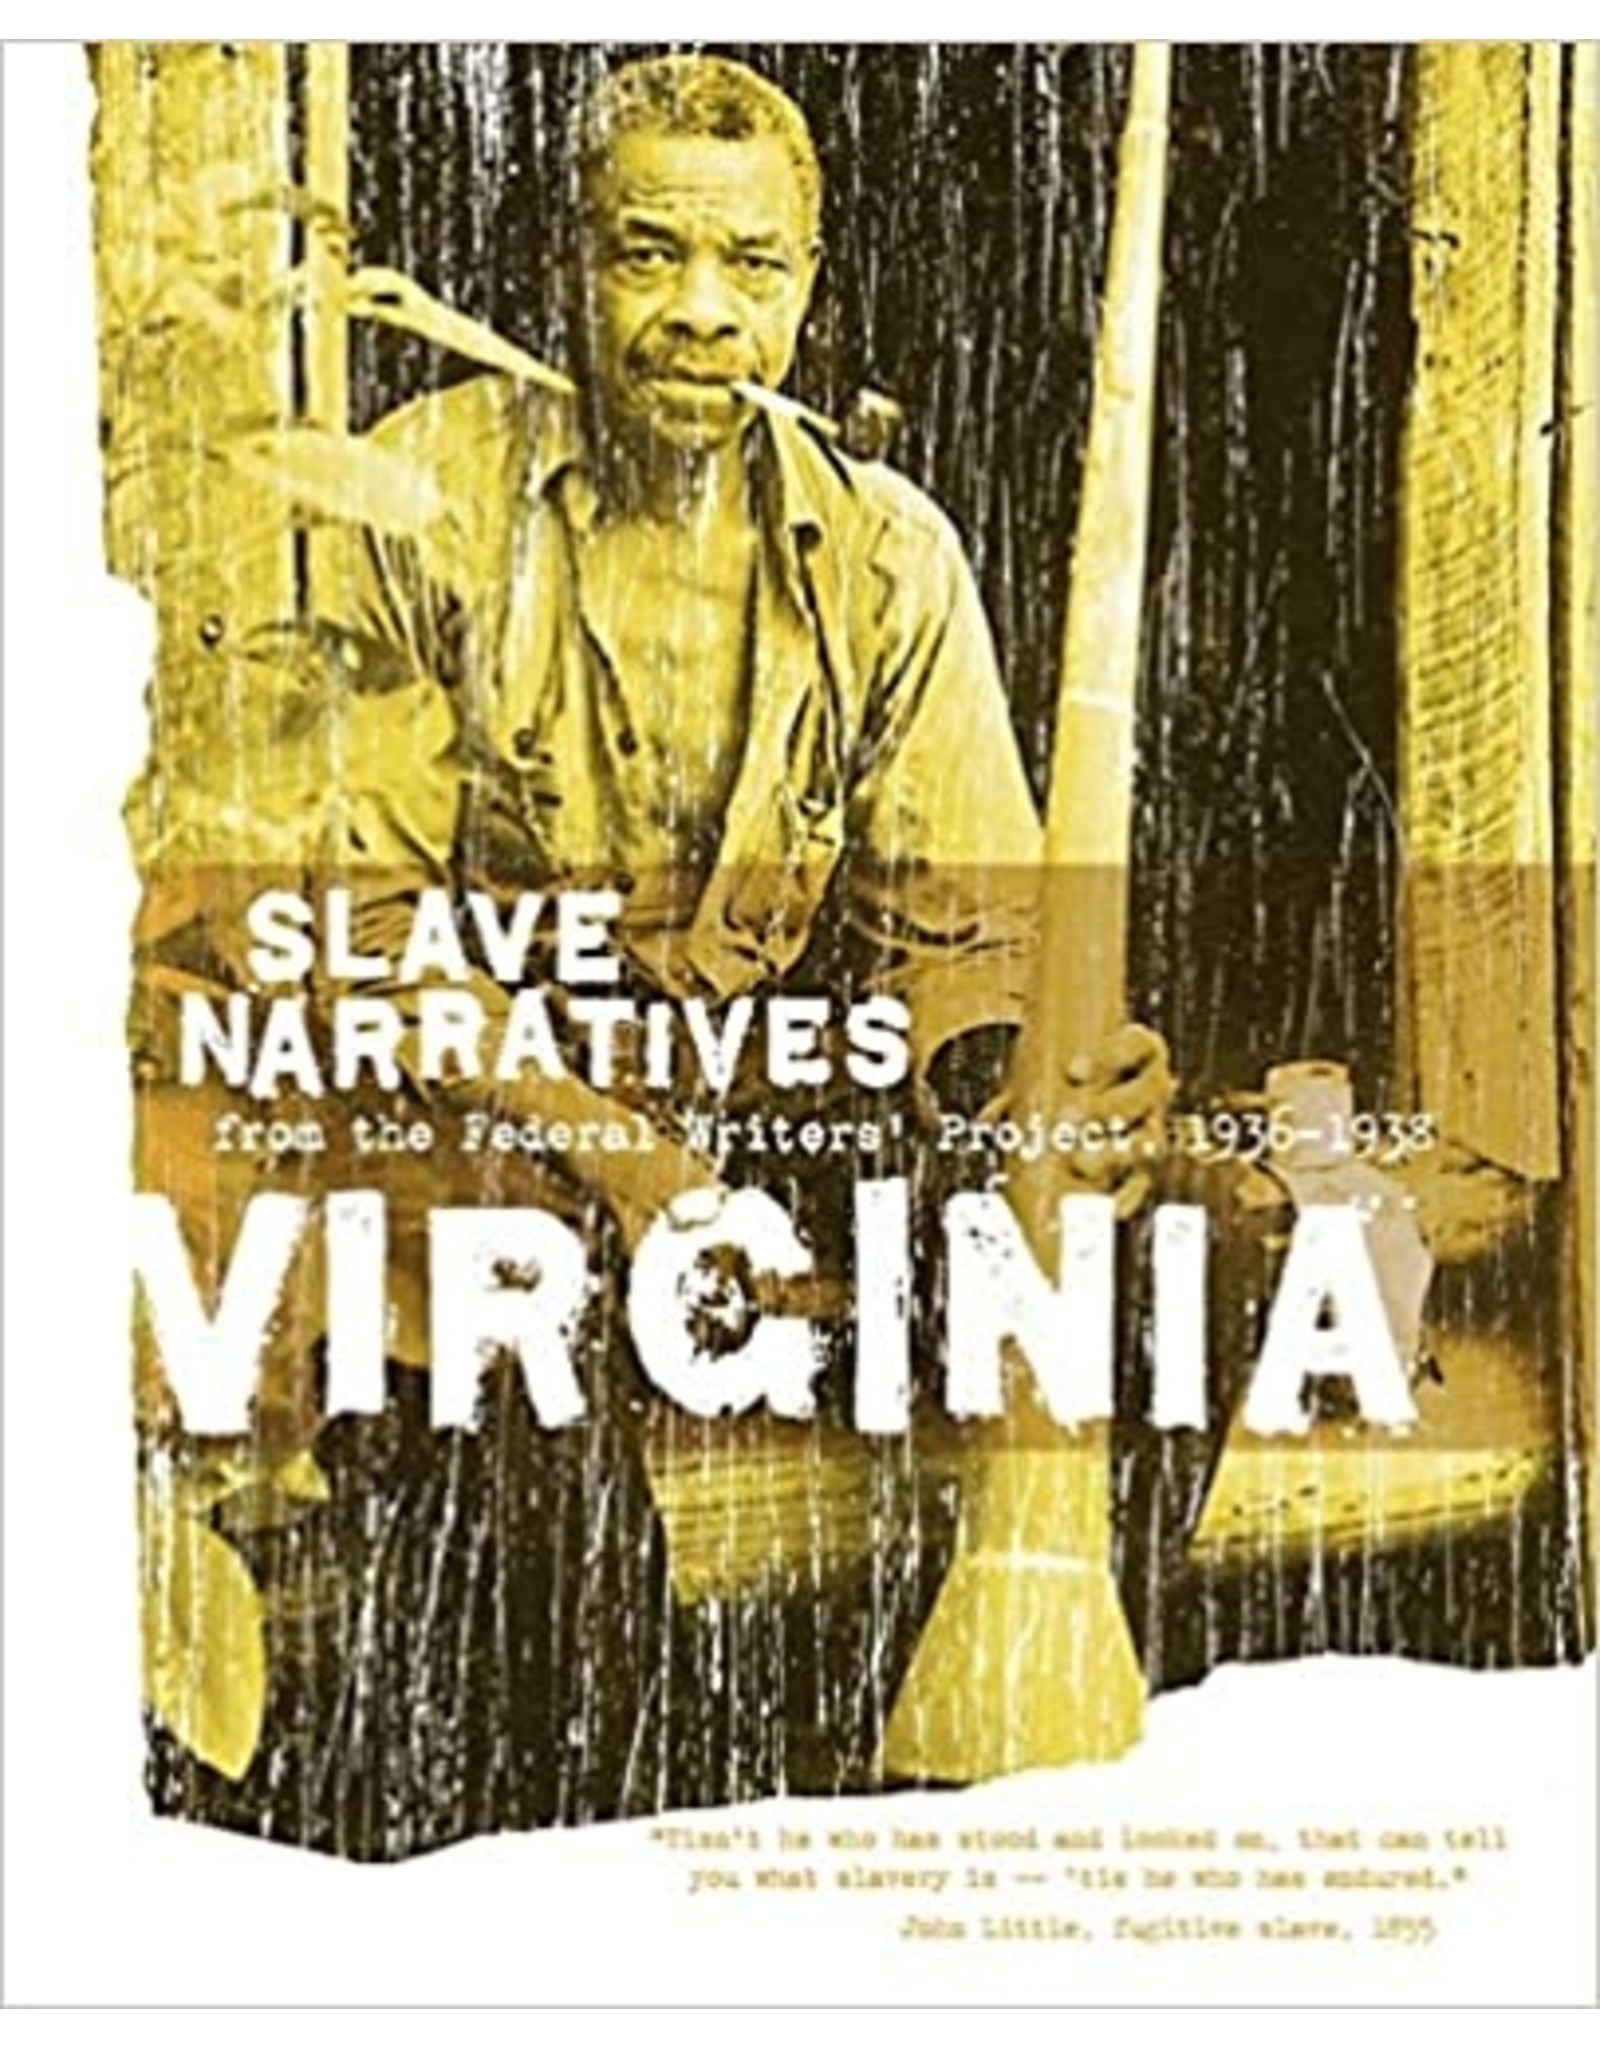 Virginia Slave Narratives: Slave Narratives from the Federal Writers' Project 1936-1938